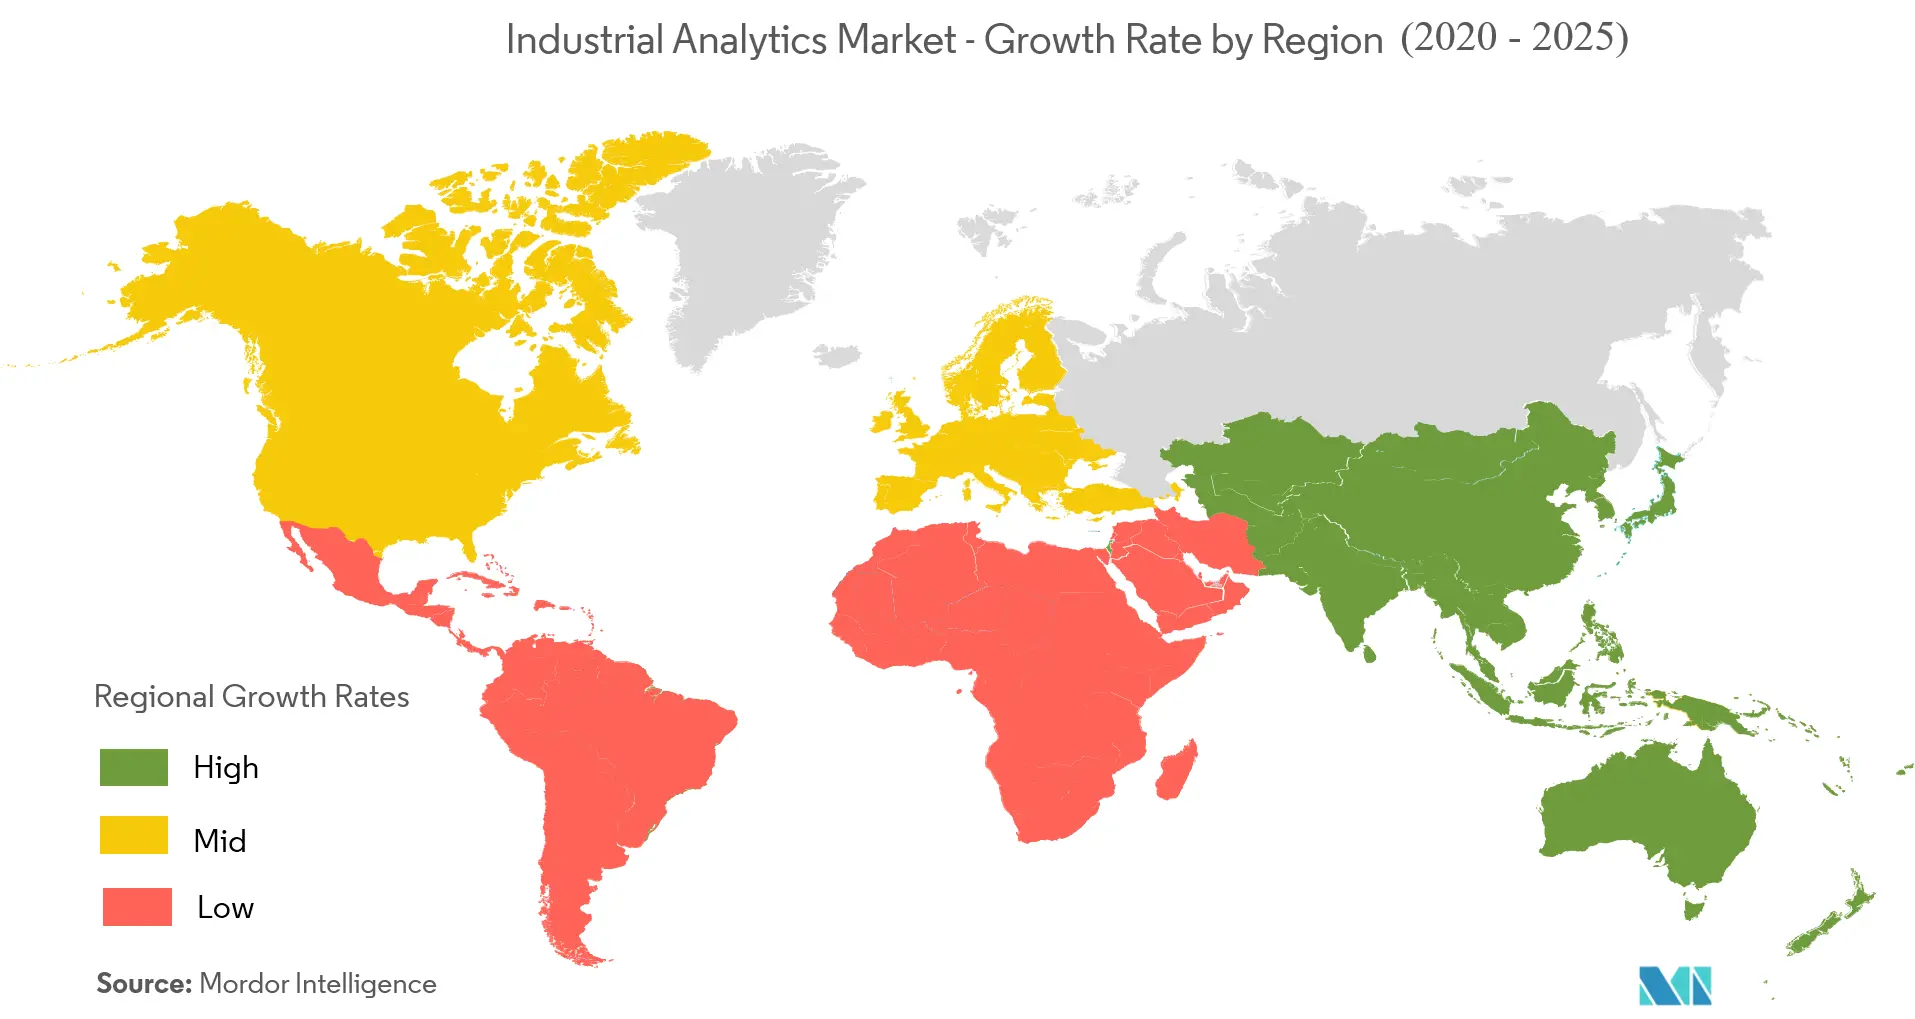 Industrial Analytics Market - Growth Rate by Region (2020 - 2025)